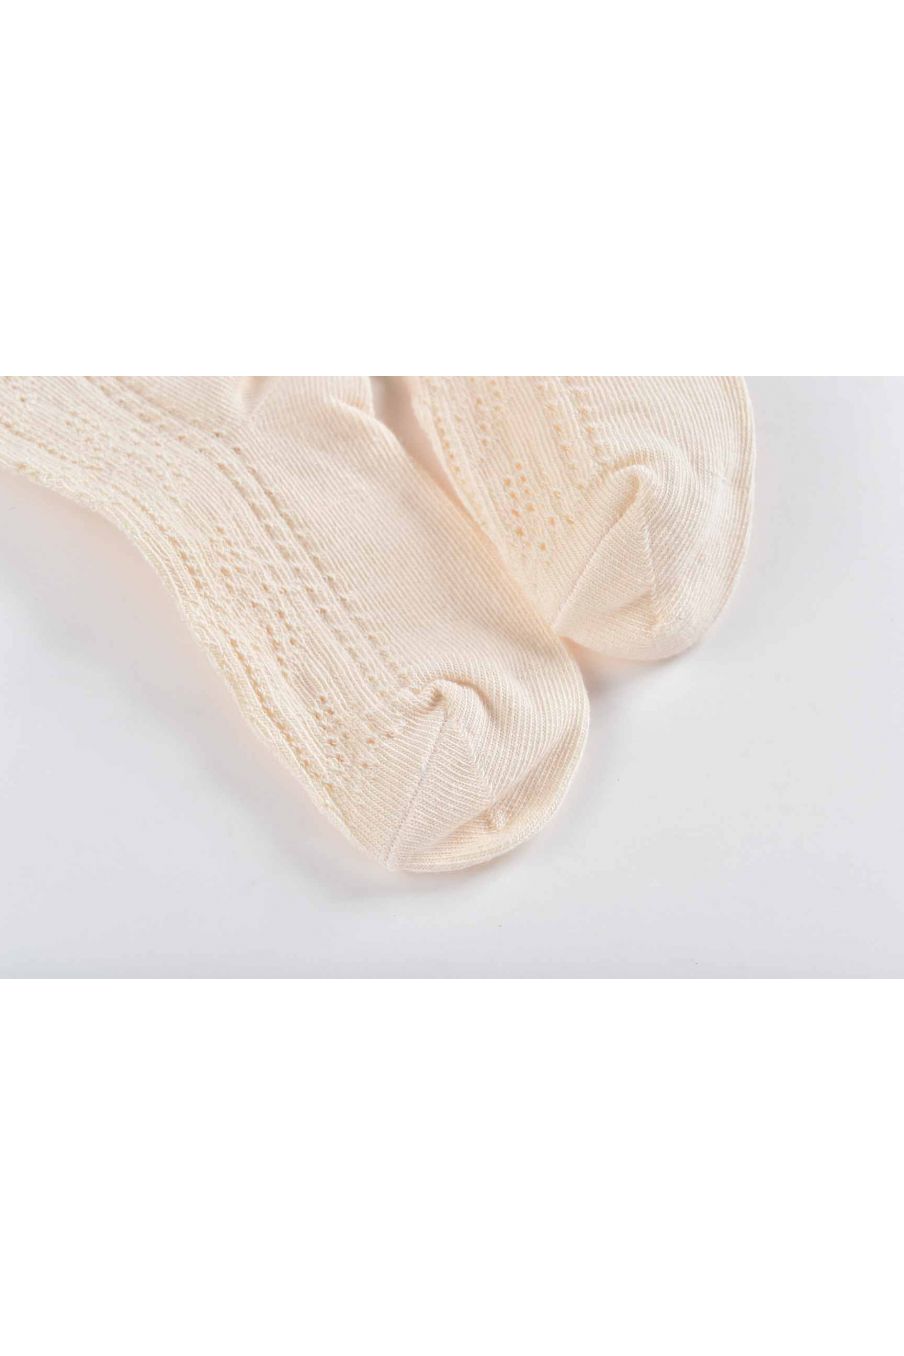 bebe-fille-chaussettes-carie-cream